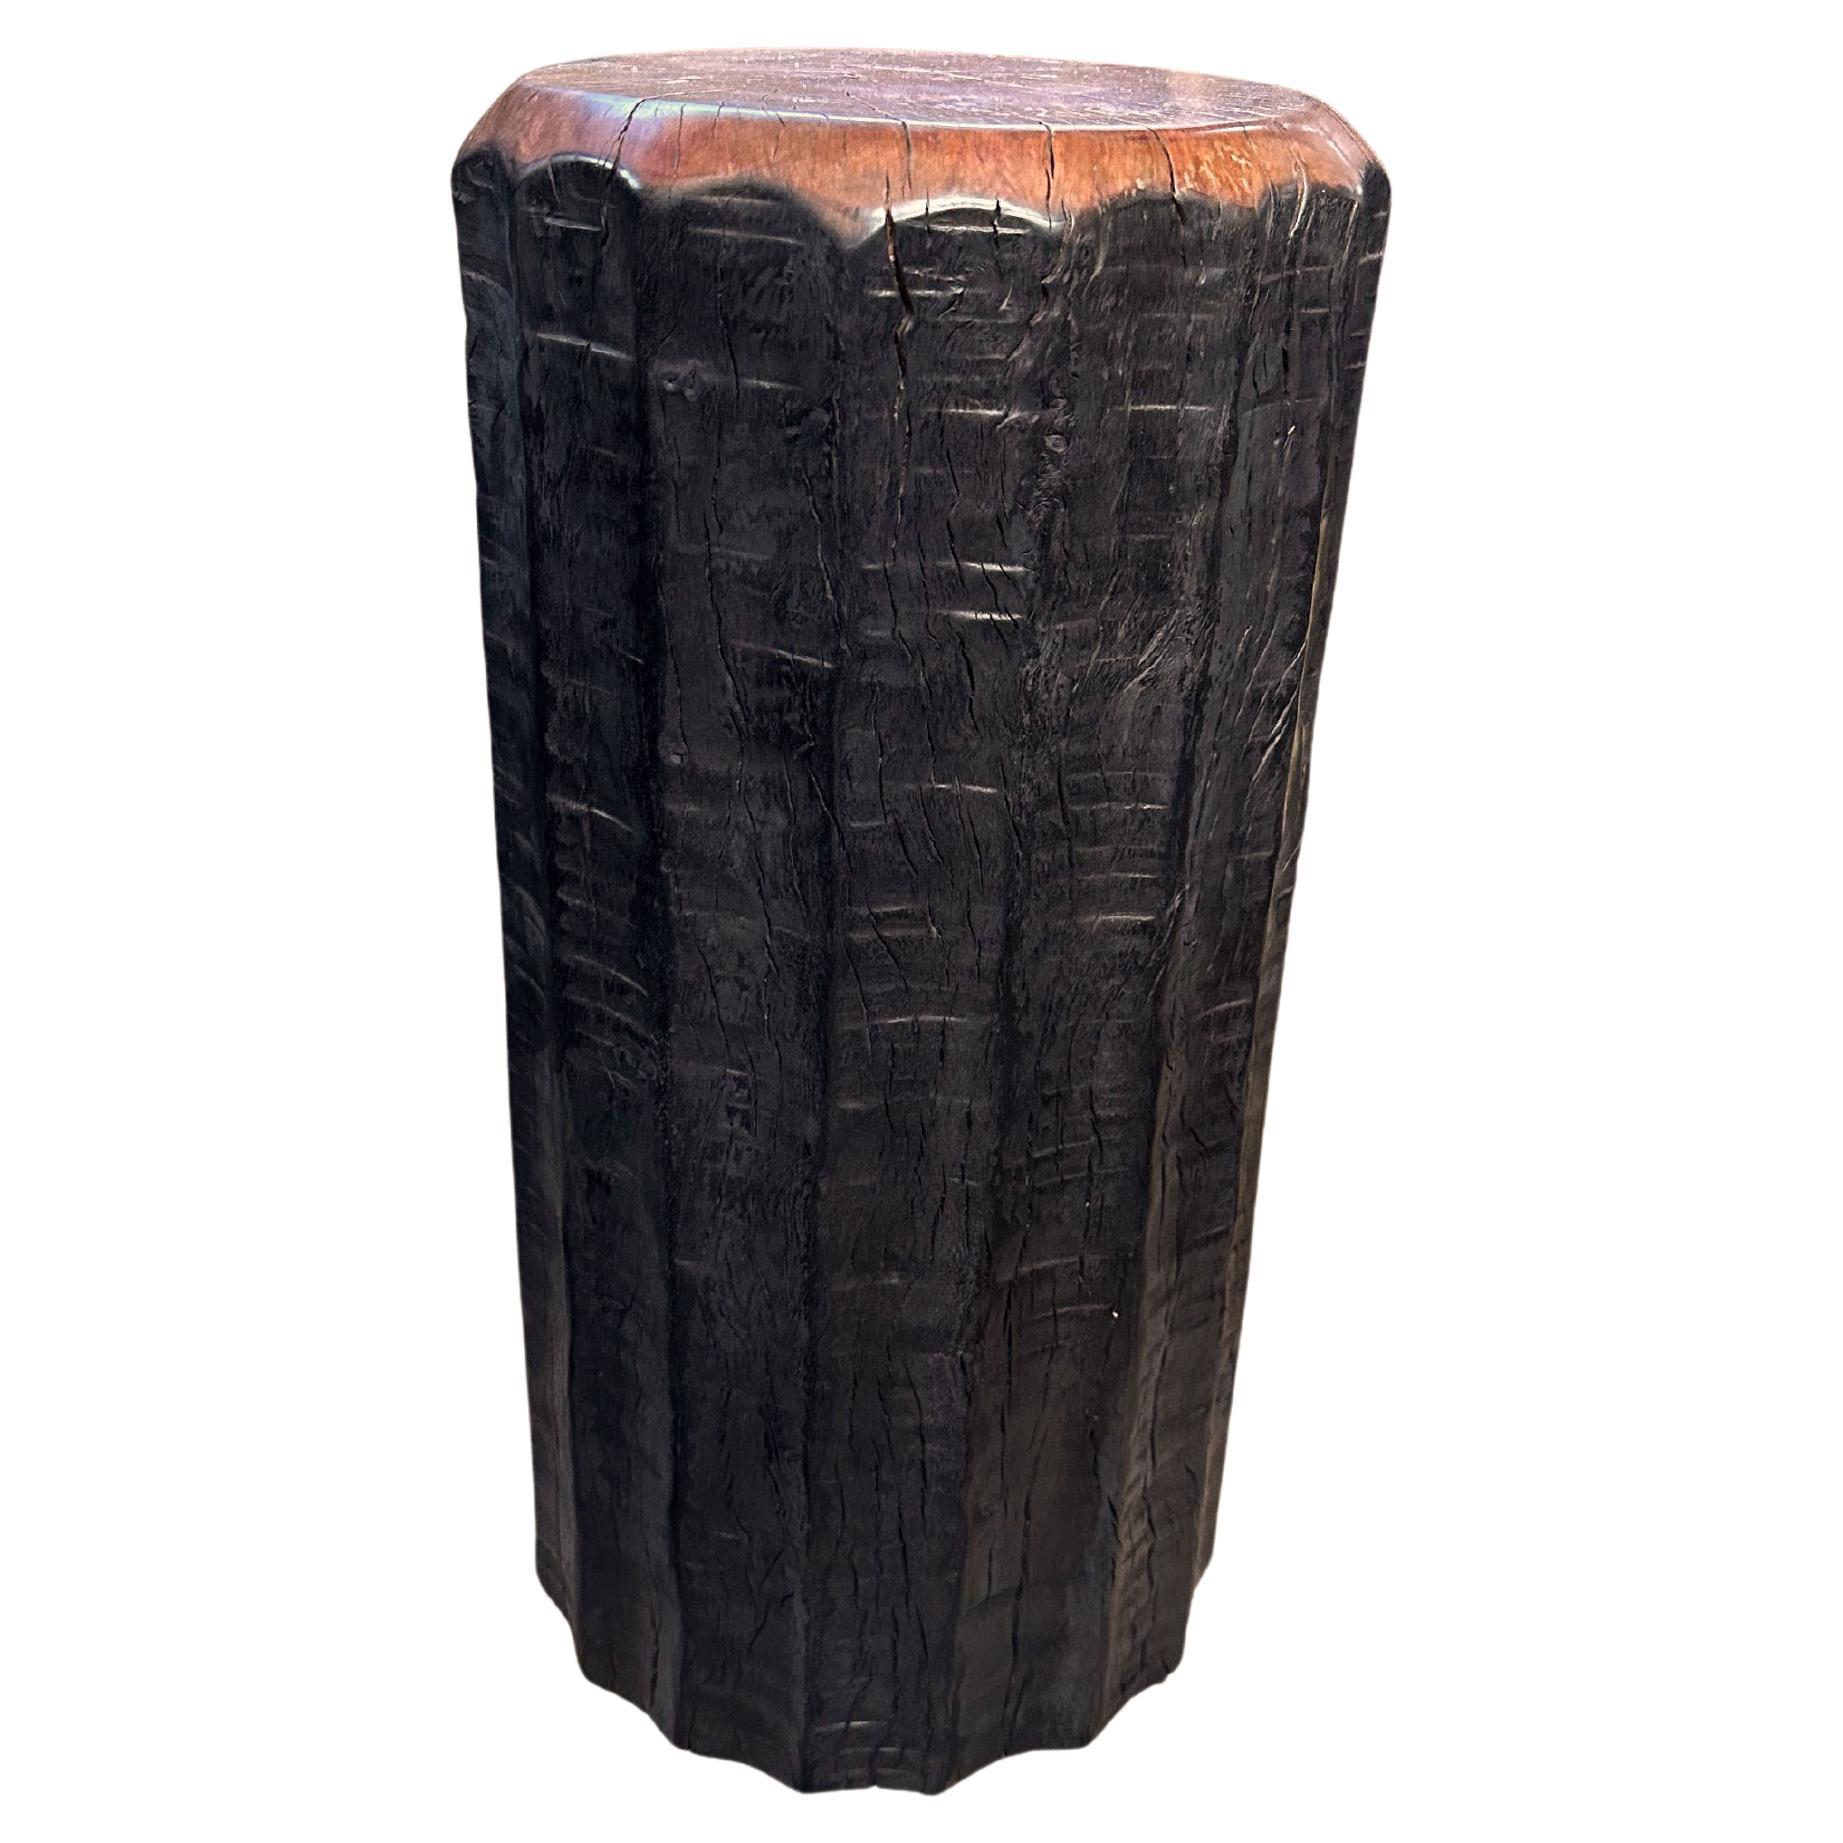 Solid Lychee Wood Side Table Stunning Textures, Ribbed Detailing Modern Organic For Sale